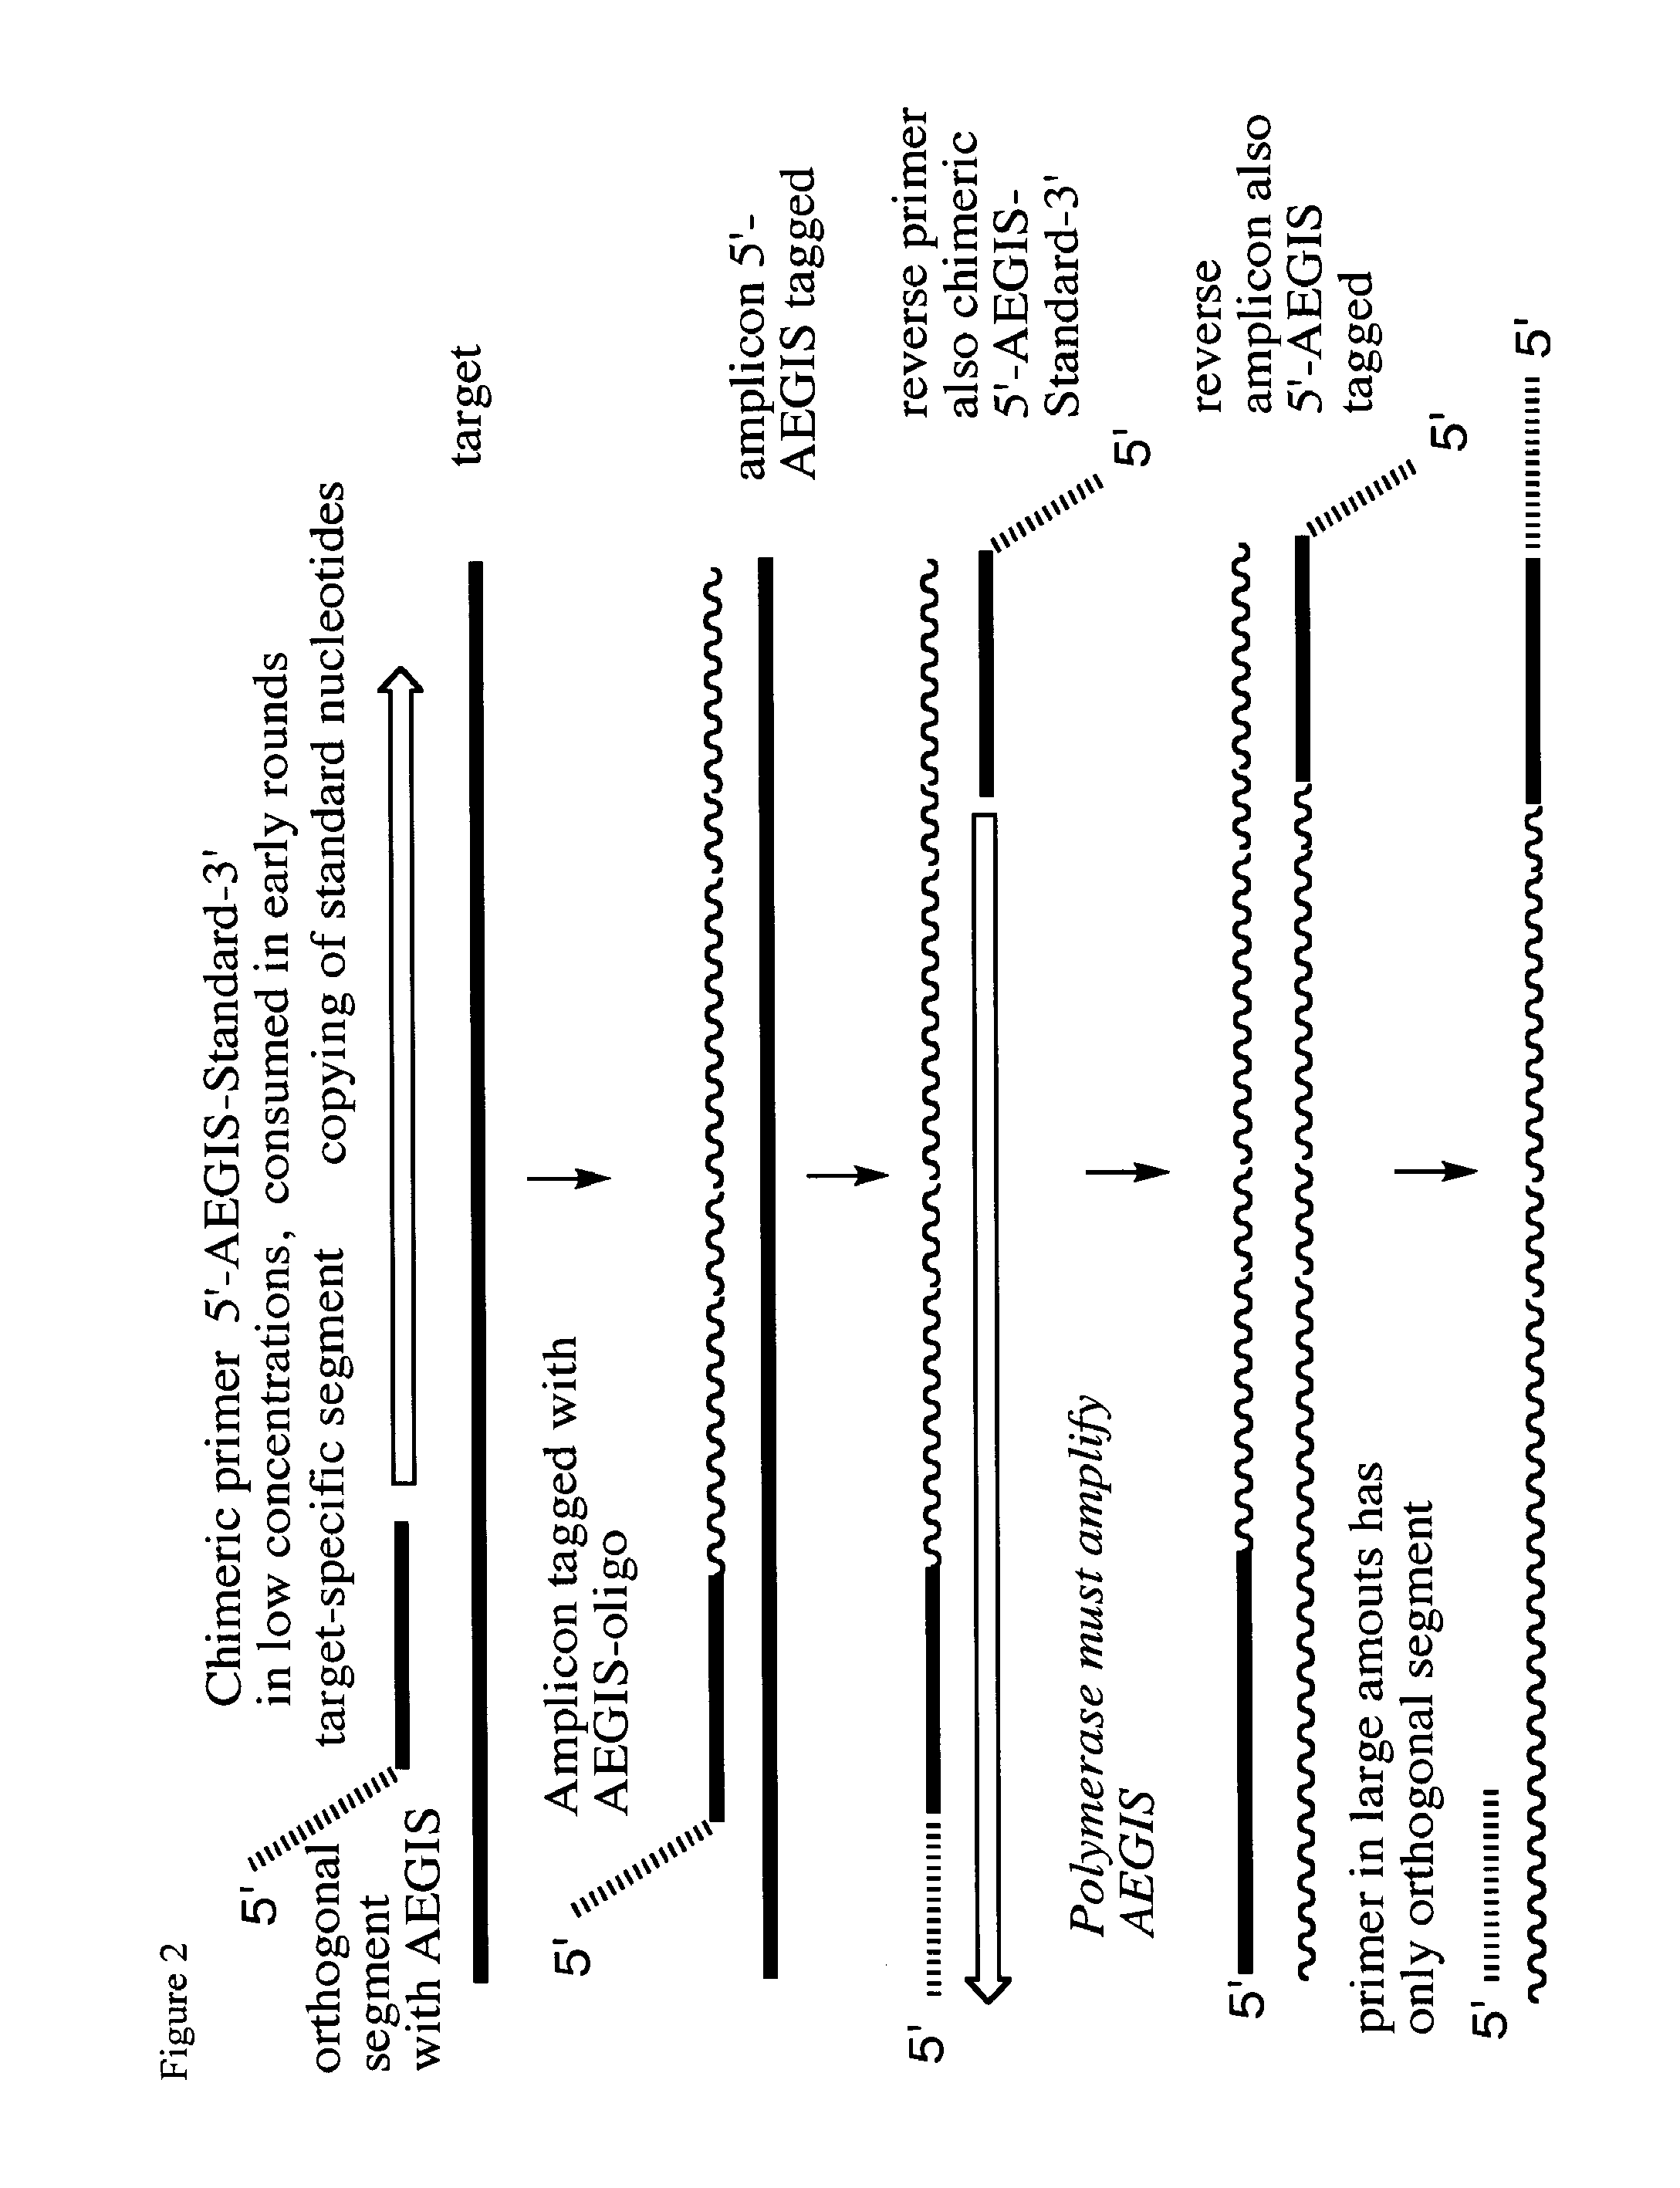 Polymerase incorporation of non-standard nucleotides